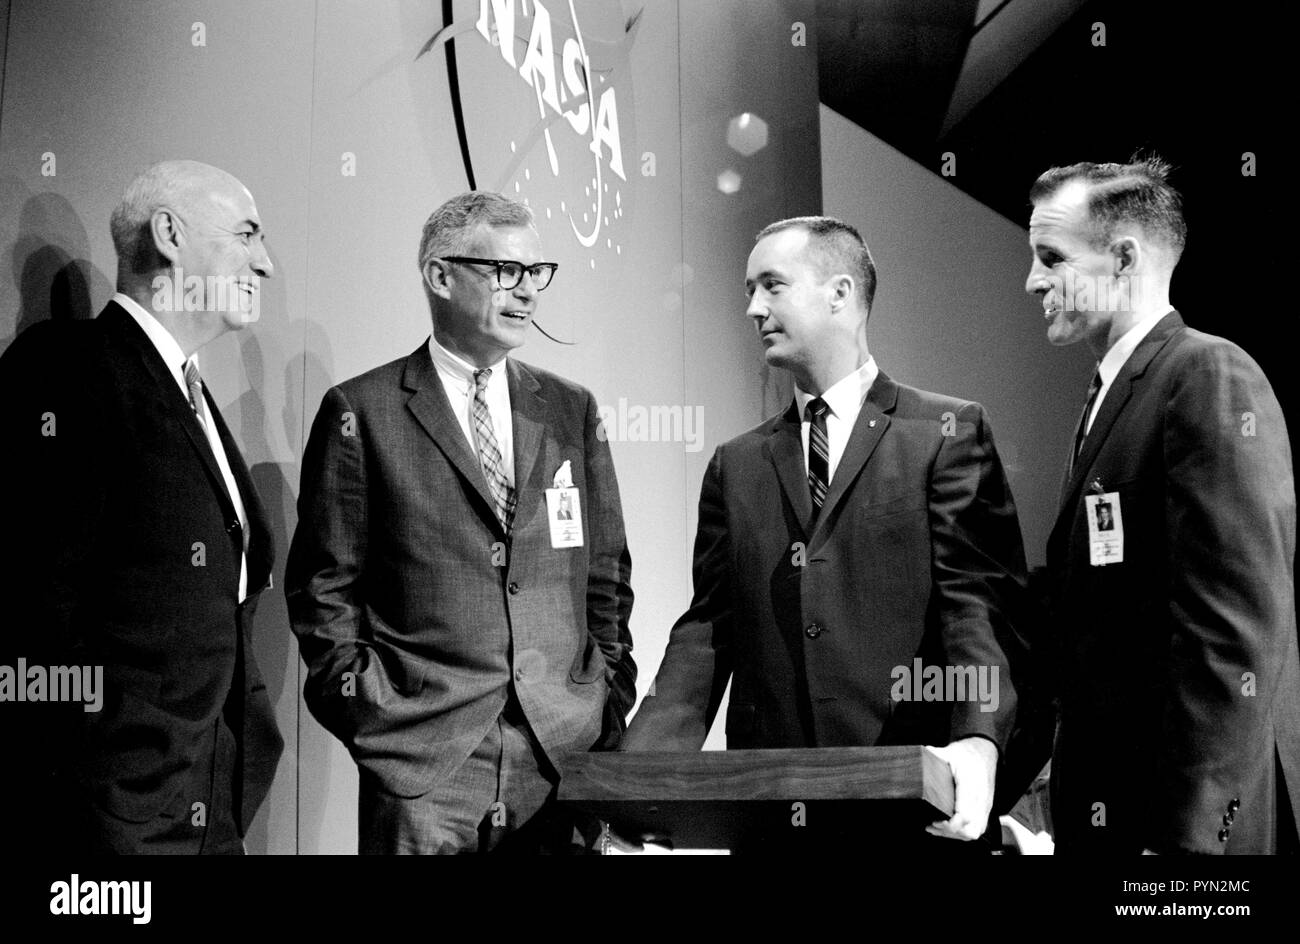 (11 June 1965) --- The Gemini-4 prime crew pose with two NASA officials after a press conference in the MSC auditorium. Left to right, are Dr. Robert R. Gilruth, MSC director; Dr. Robert C. Seamans Jr., associate administrator, National Aeronautics and Space Administration; astronaut James A. McDivitt, command pilot of the Gemini-4 flight; and astronaut Edward H. White II, pilot of the mission. Stock Photo